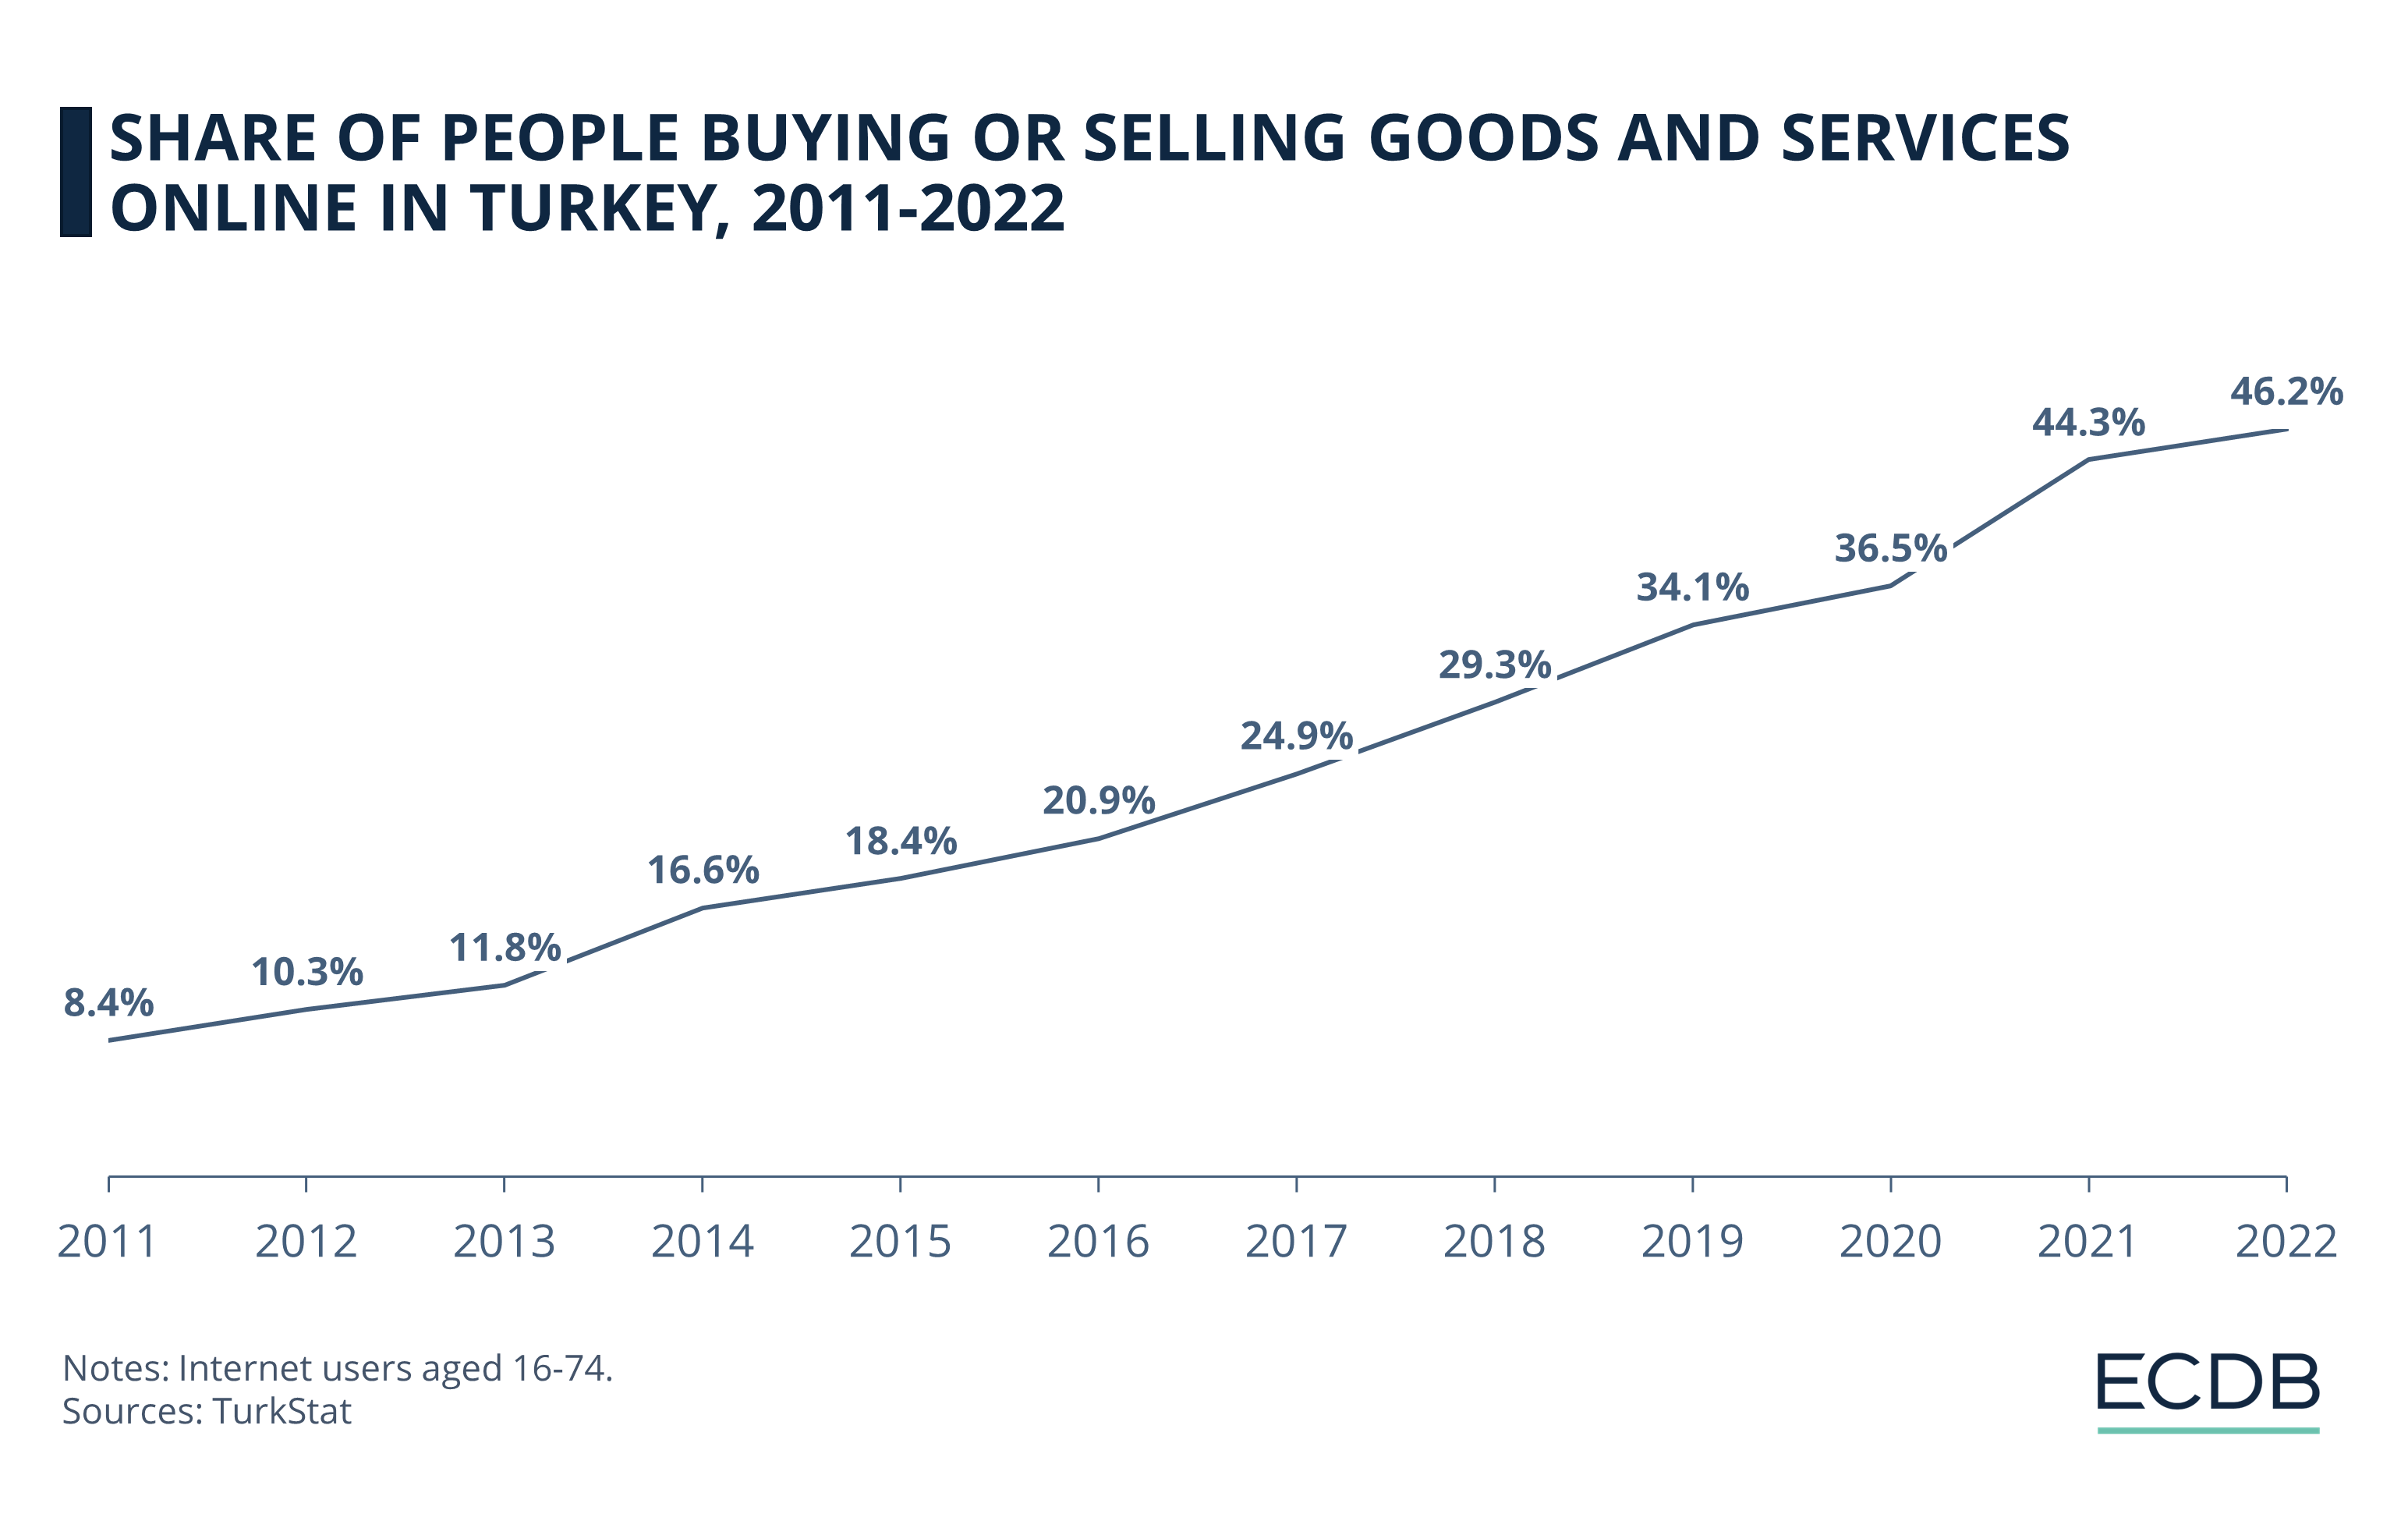 Share of People Buying or Selling Goods and Services Online in Turkey, 2011-2022